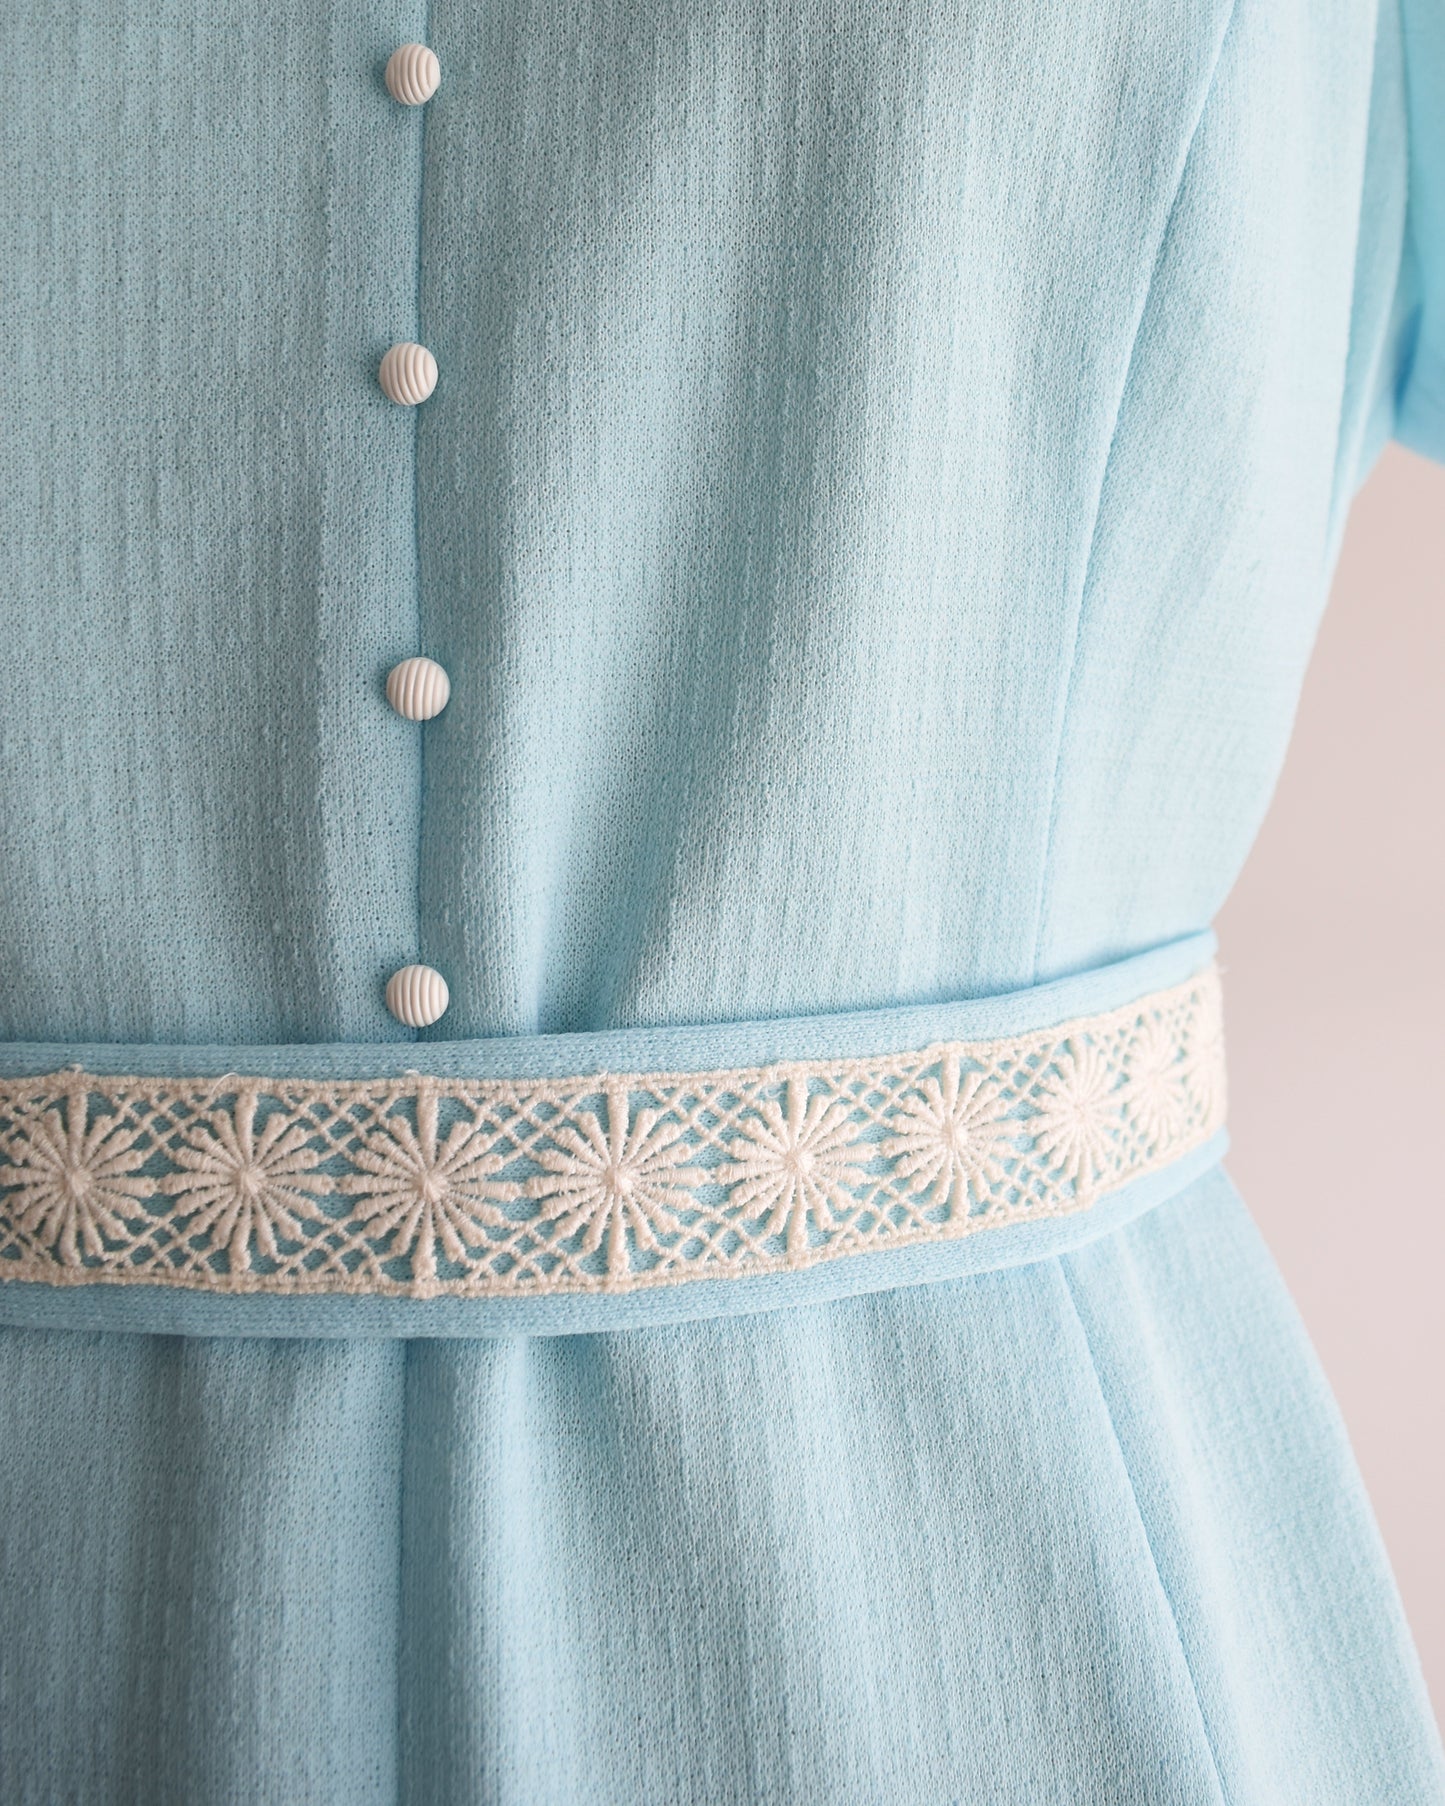 close up of the waist of the dress, which shows the buttons and lace trim belt